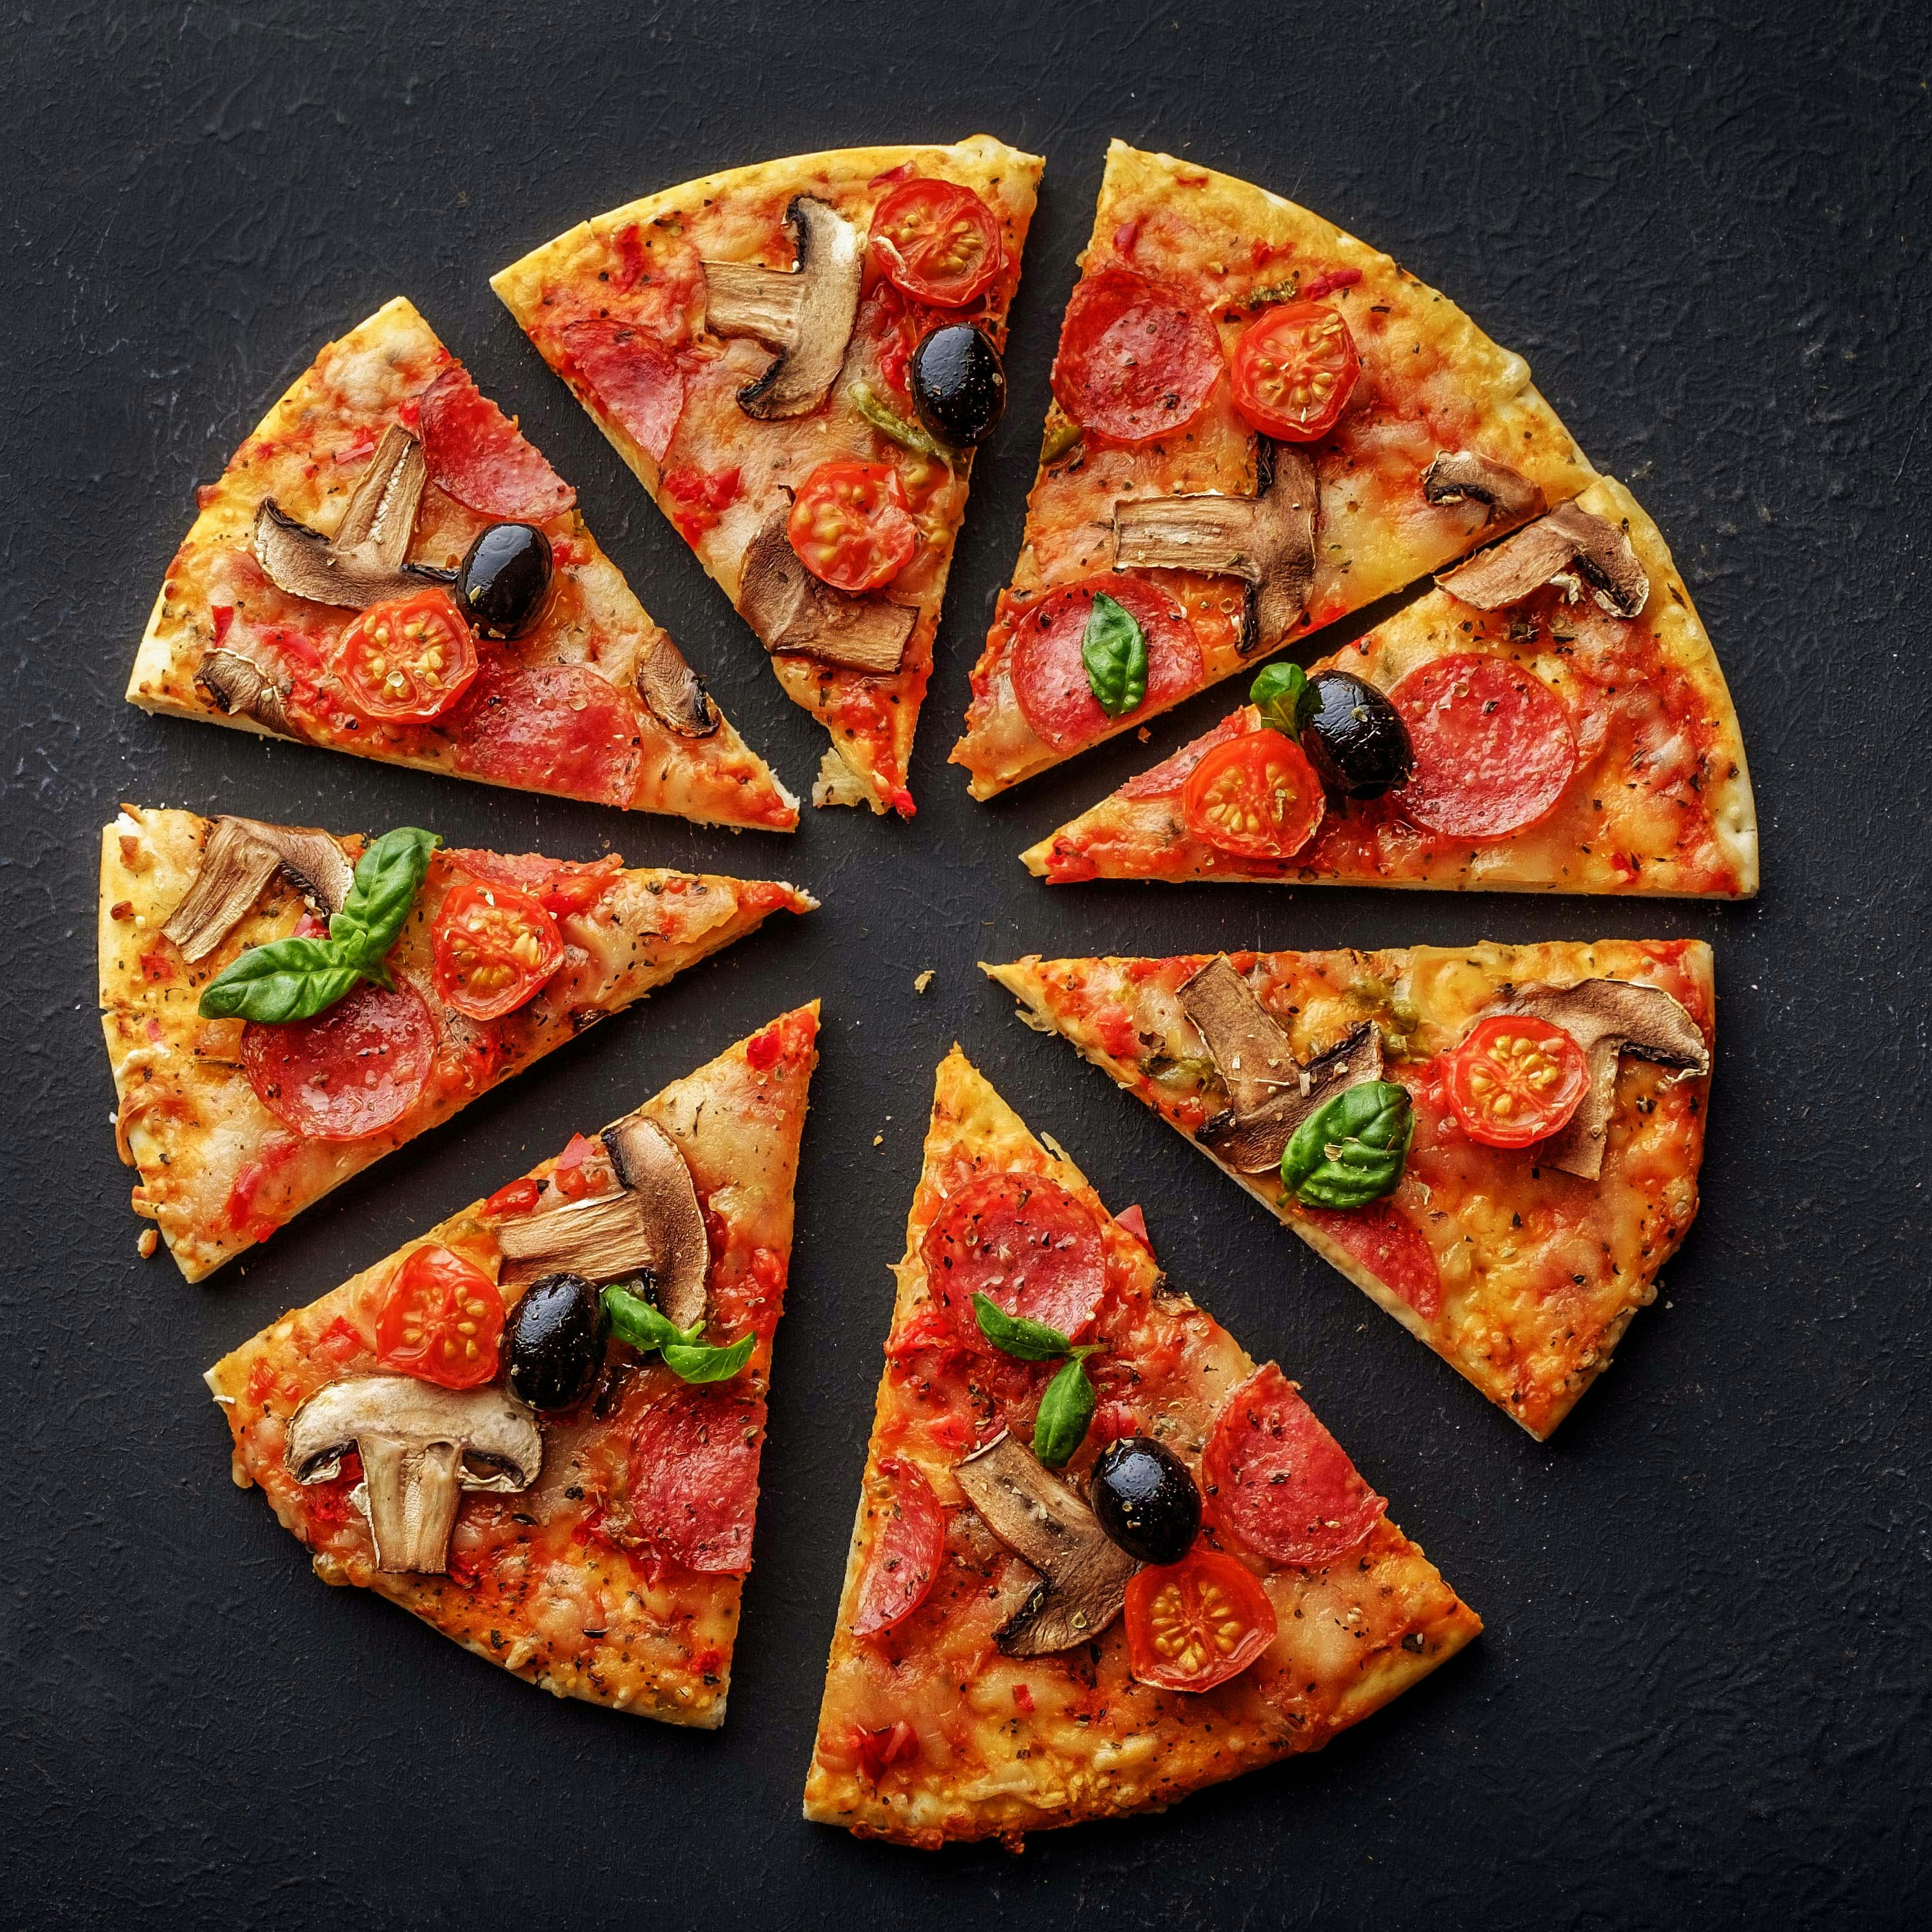 Super Pizza App - Apps on Google Play